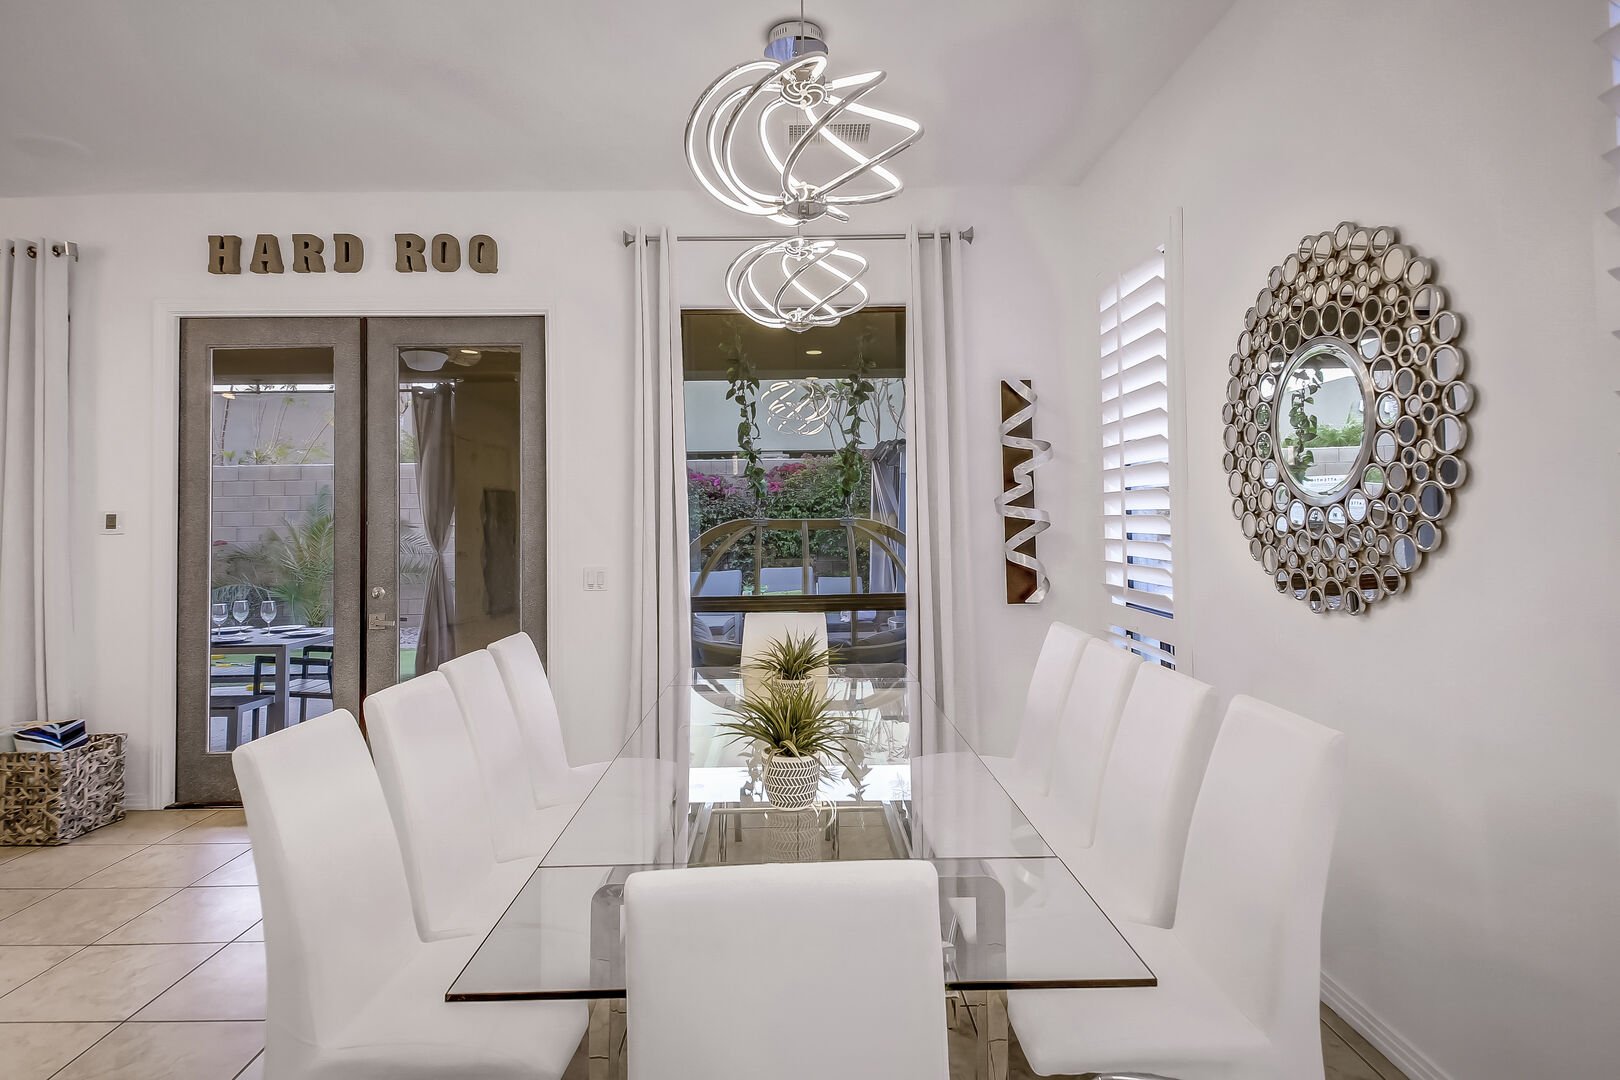 Perfect for larger groups seeking to enjoy a family-style dinner.